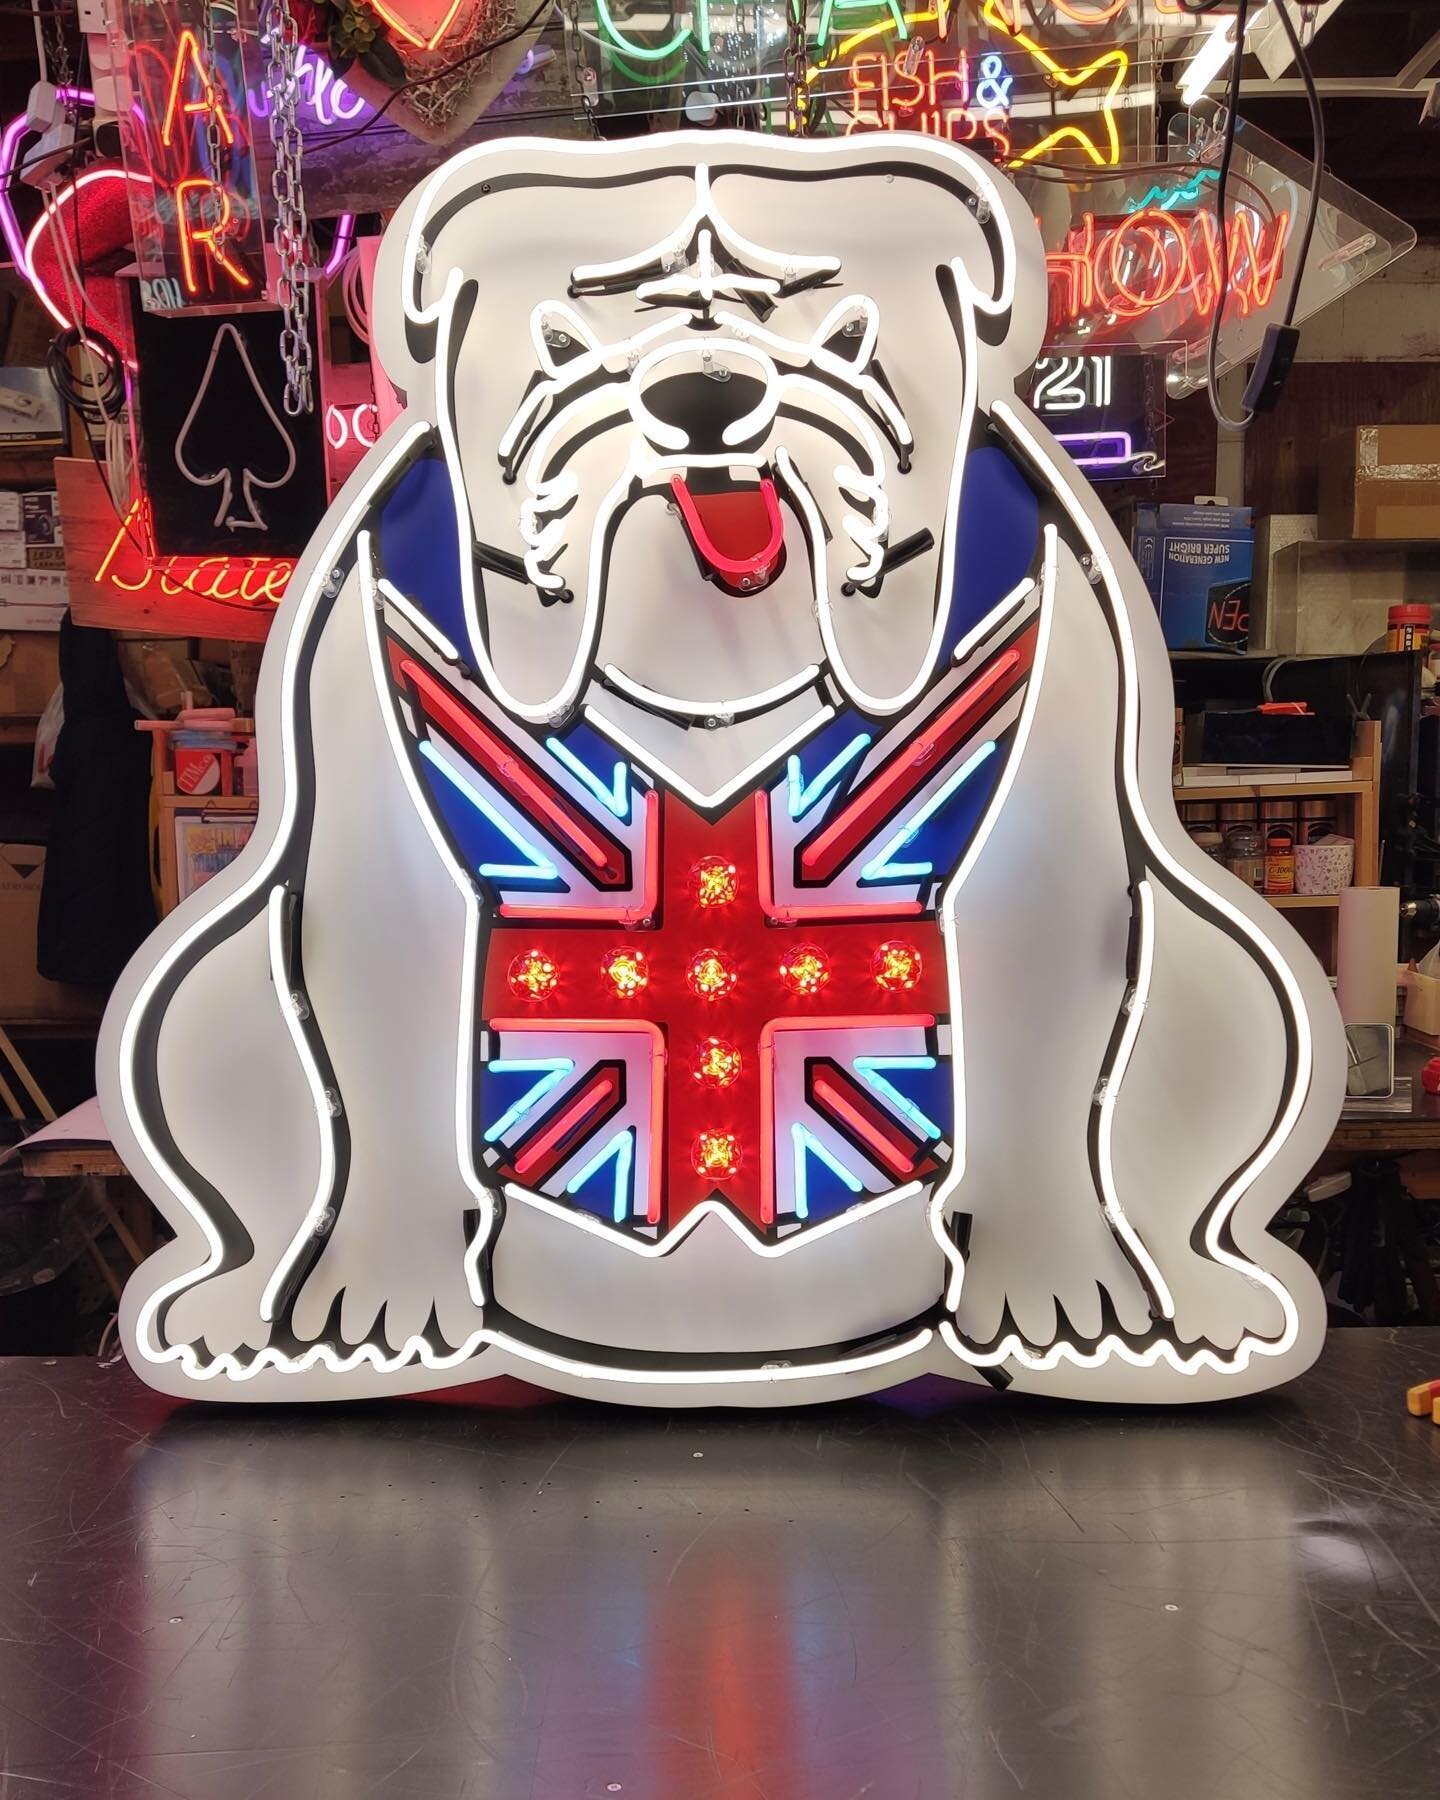 Meet Butch! 
Another addition to my Bulldog neons.
Delighted to say he has found a happy home 💗 
 
Made using aluminium, neon and Vegas style bulbs 

#bulldog #neon #adogisnotjustforchrismas